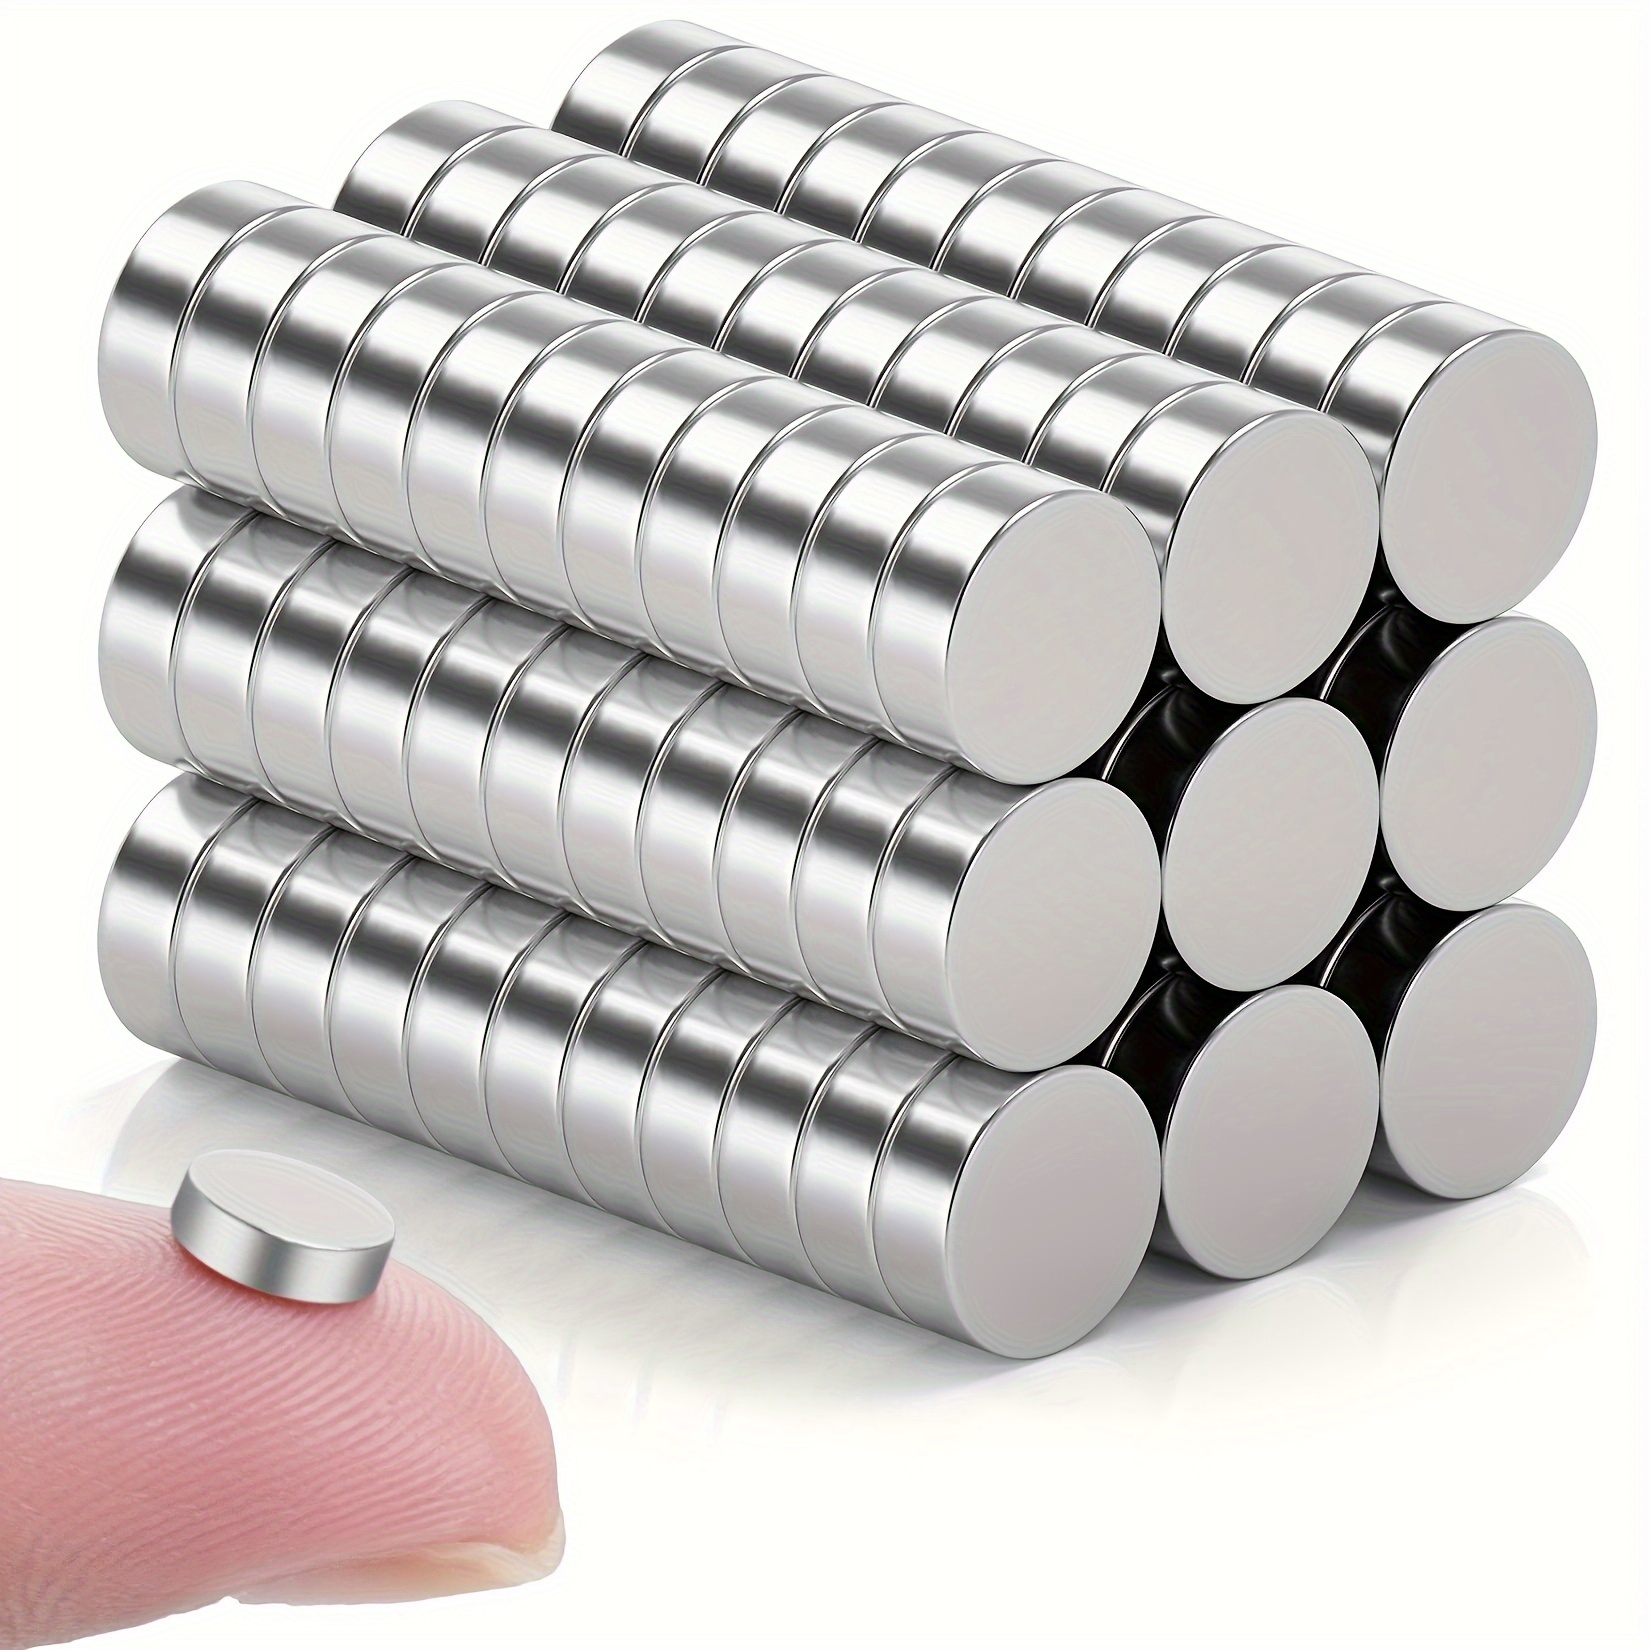 Magnets for Crafts - 100 Premium 1 inch Round Strong Magnets – 25mm x 4mm -  Great for Creating Fridge Magnets and Other Magnetic Craft Projects:  : Industrial & Scientific